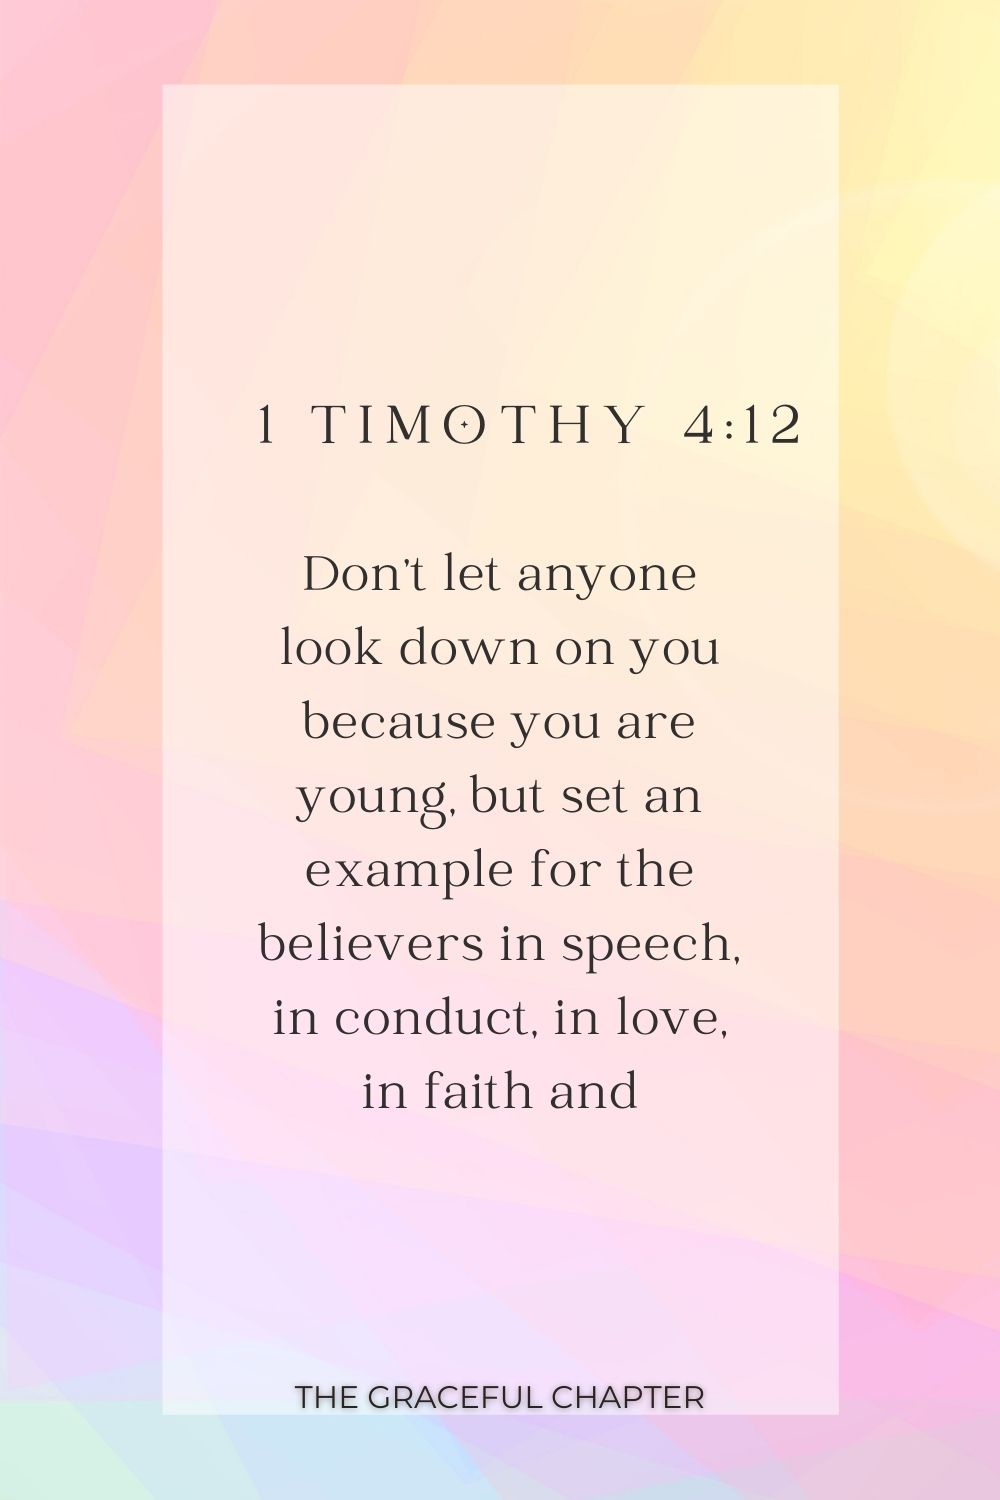 Don’t let anyone look down on you because you are young, but set an example for the believers in speech, in conduct, in love, in faith and in purity. 1 Timothy 4:12